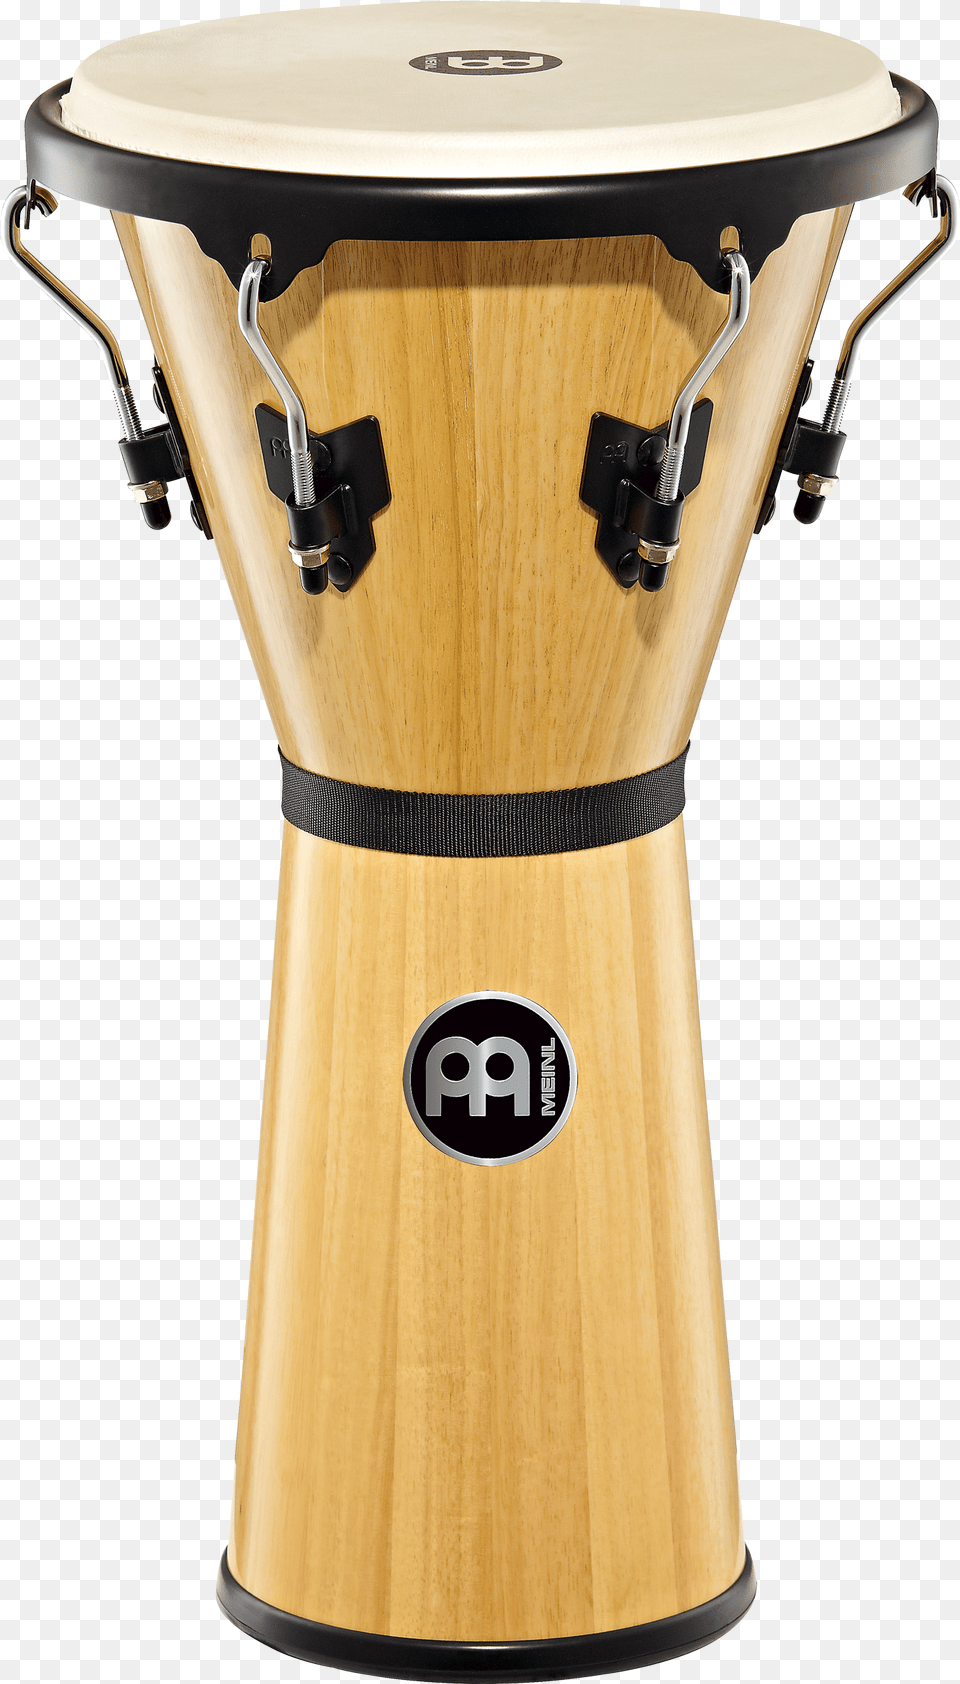 Meinl Headliner Djembe, Drum, Musical Instrument, Percussion, Conga Free Png